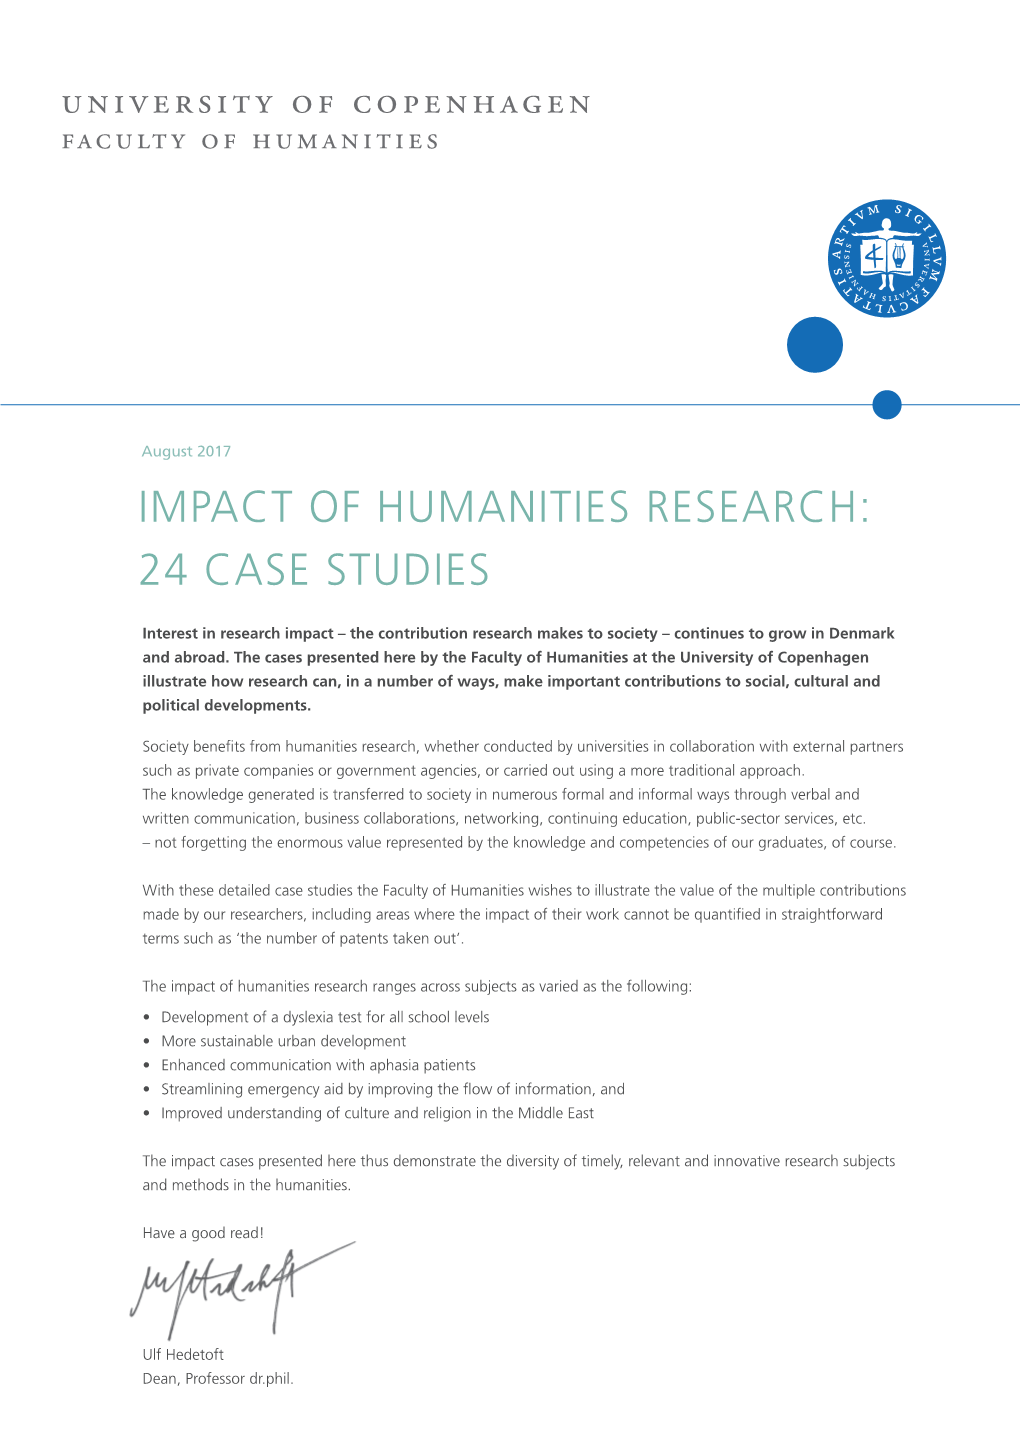 Impact of Humanities Research: 24 Case Studies